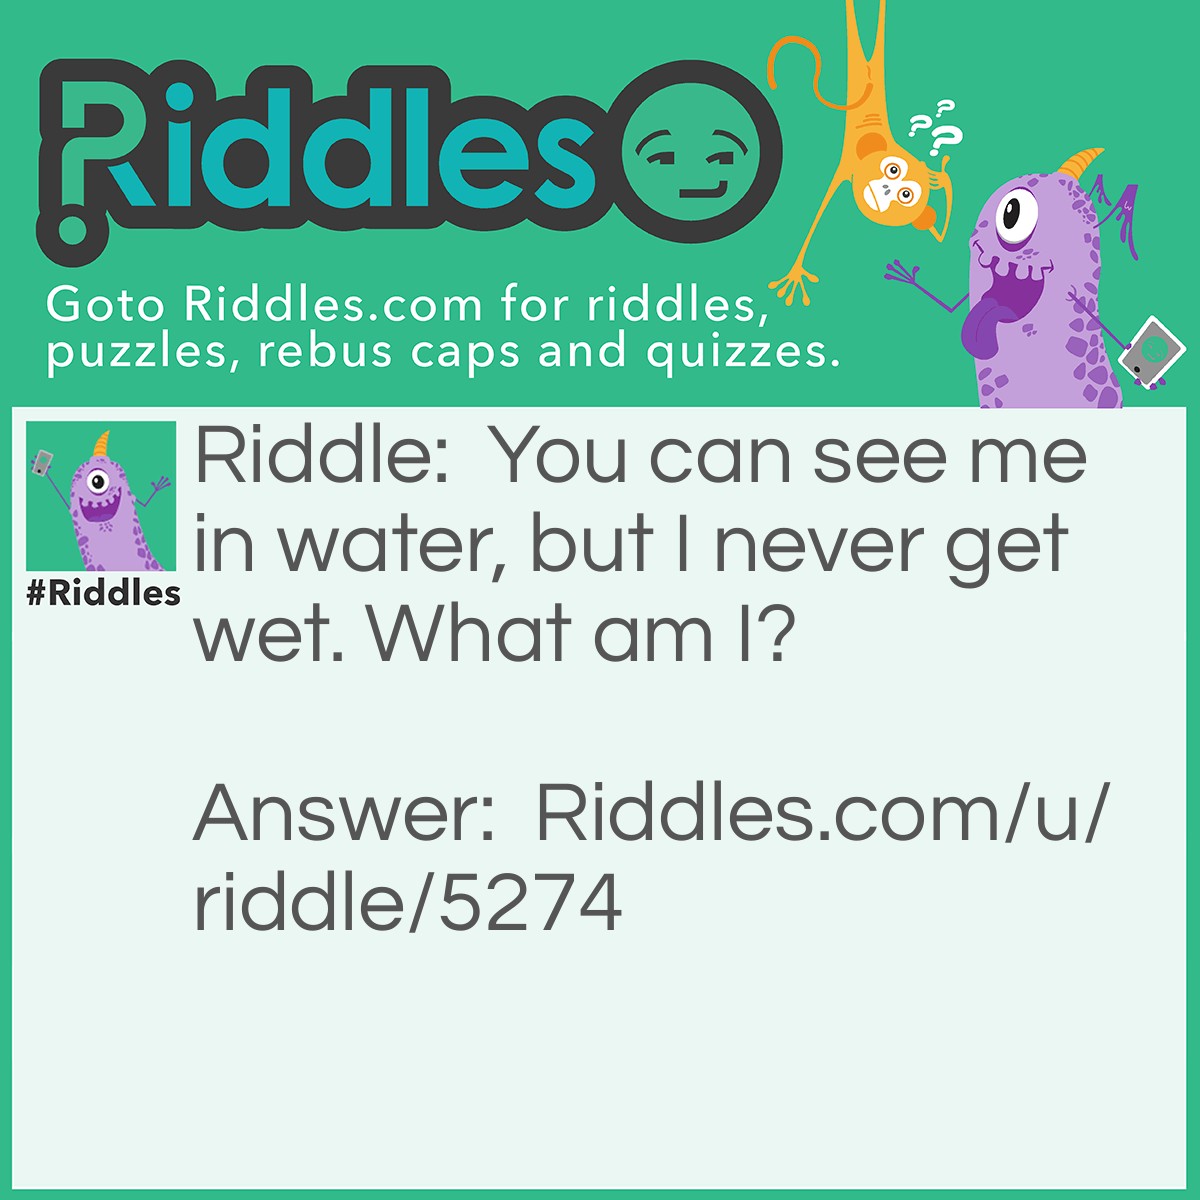 Riddle: You can see me in water, but I never get wet. What am I? Answer: Your Reflection!